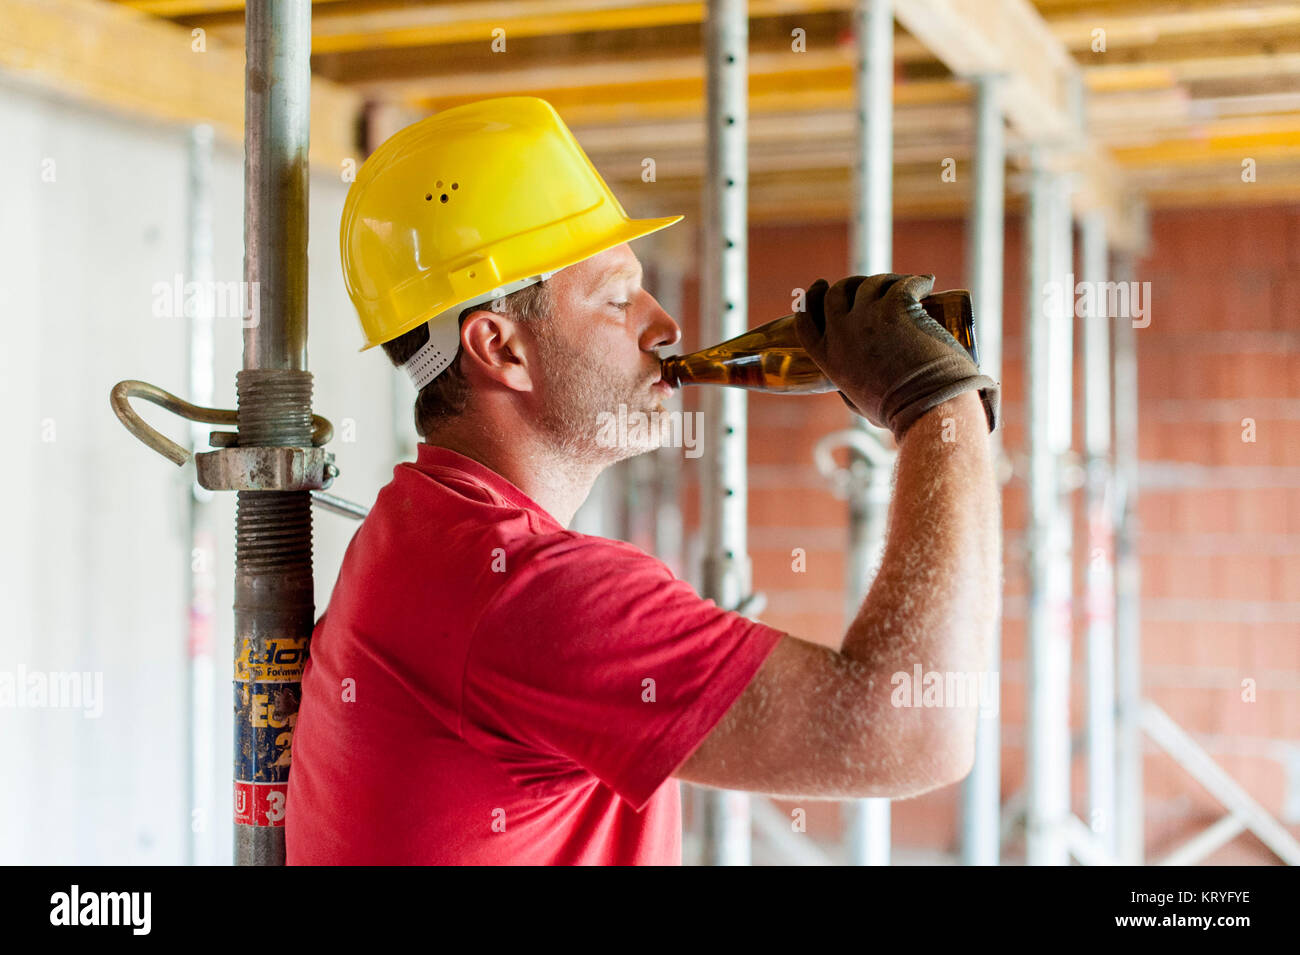 Bauarbeiter mit Bierflasche am Bau - building worker with beer bottle at builing lot Stock Photo